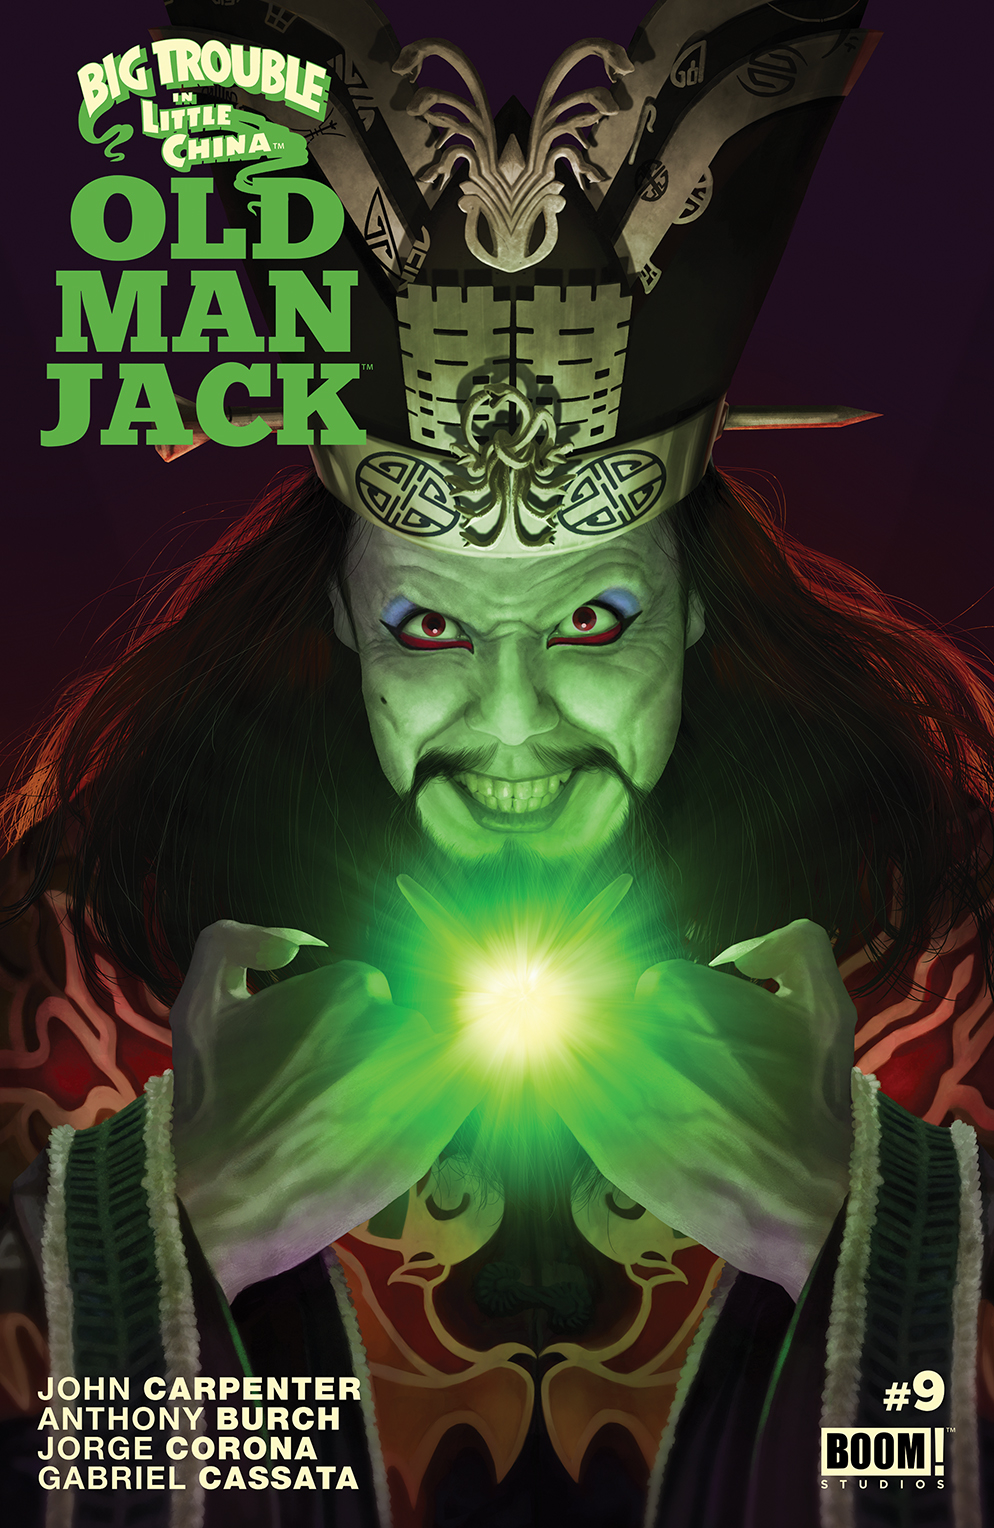 BIG TROUBLE IN LITTLE CHINA OLD MAN JACK #9